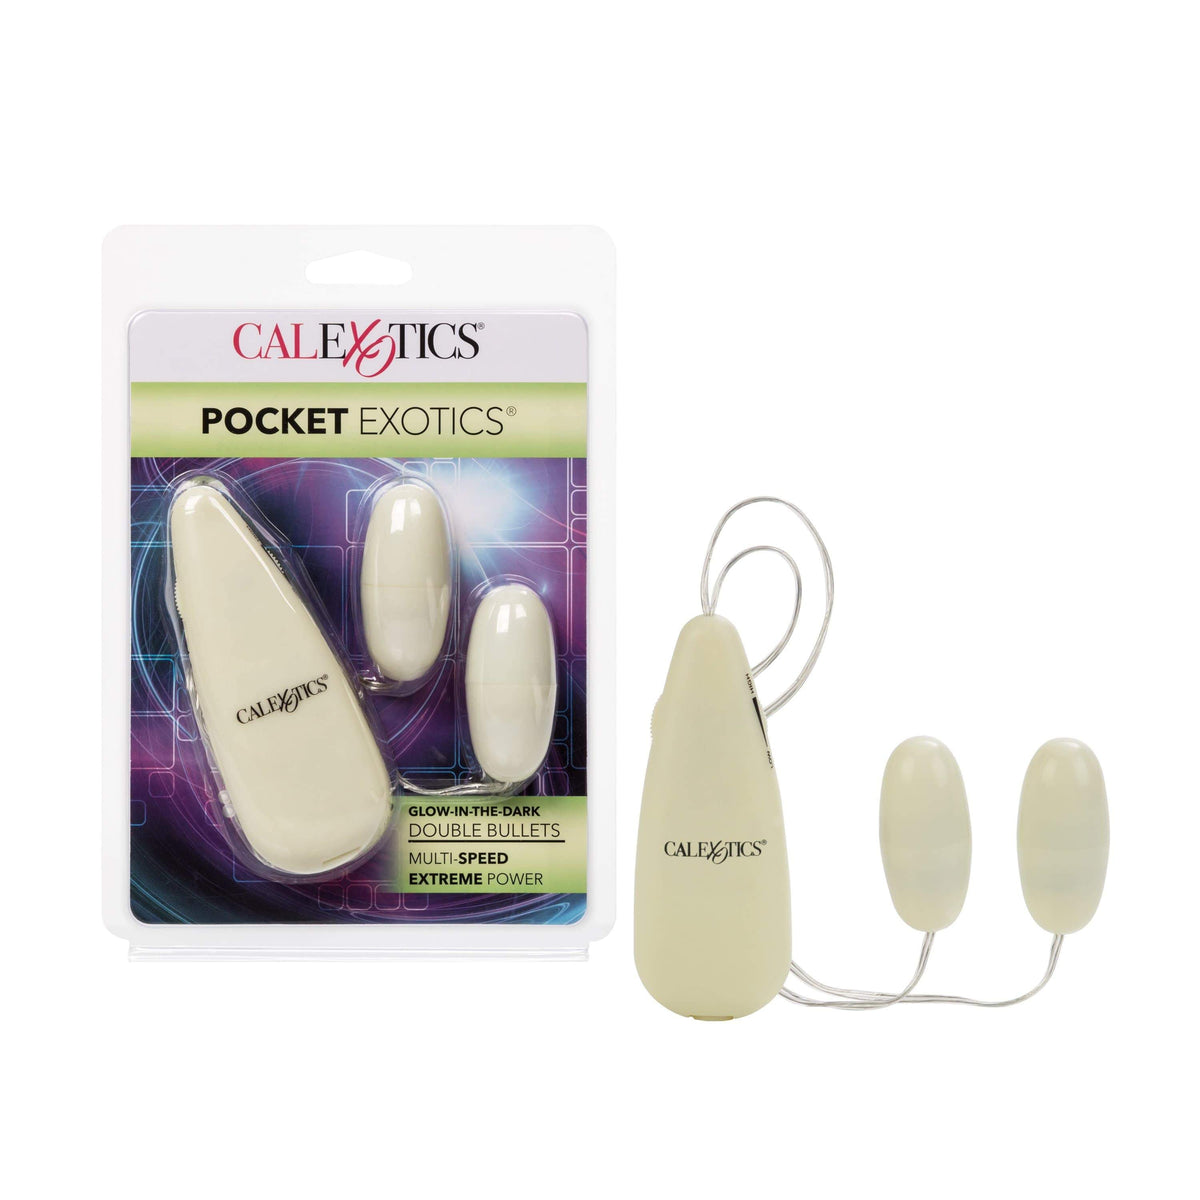 California Exotics - Pocket Exotics Glow In The Dark Double Bullets Vibrator (Green) -  Wired Remote Control Egg (Vibration) Non Rechargeable  Durio.sg